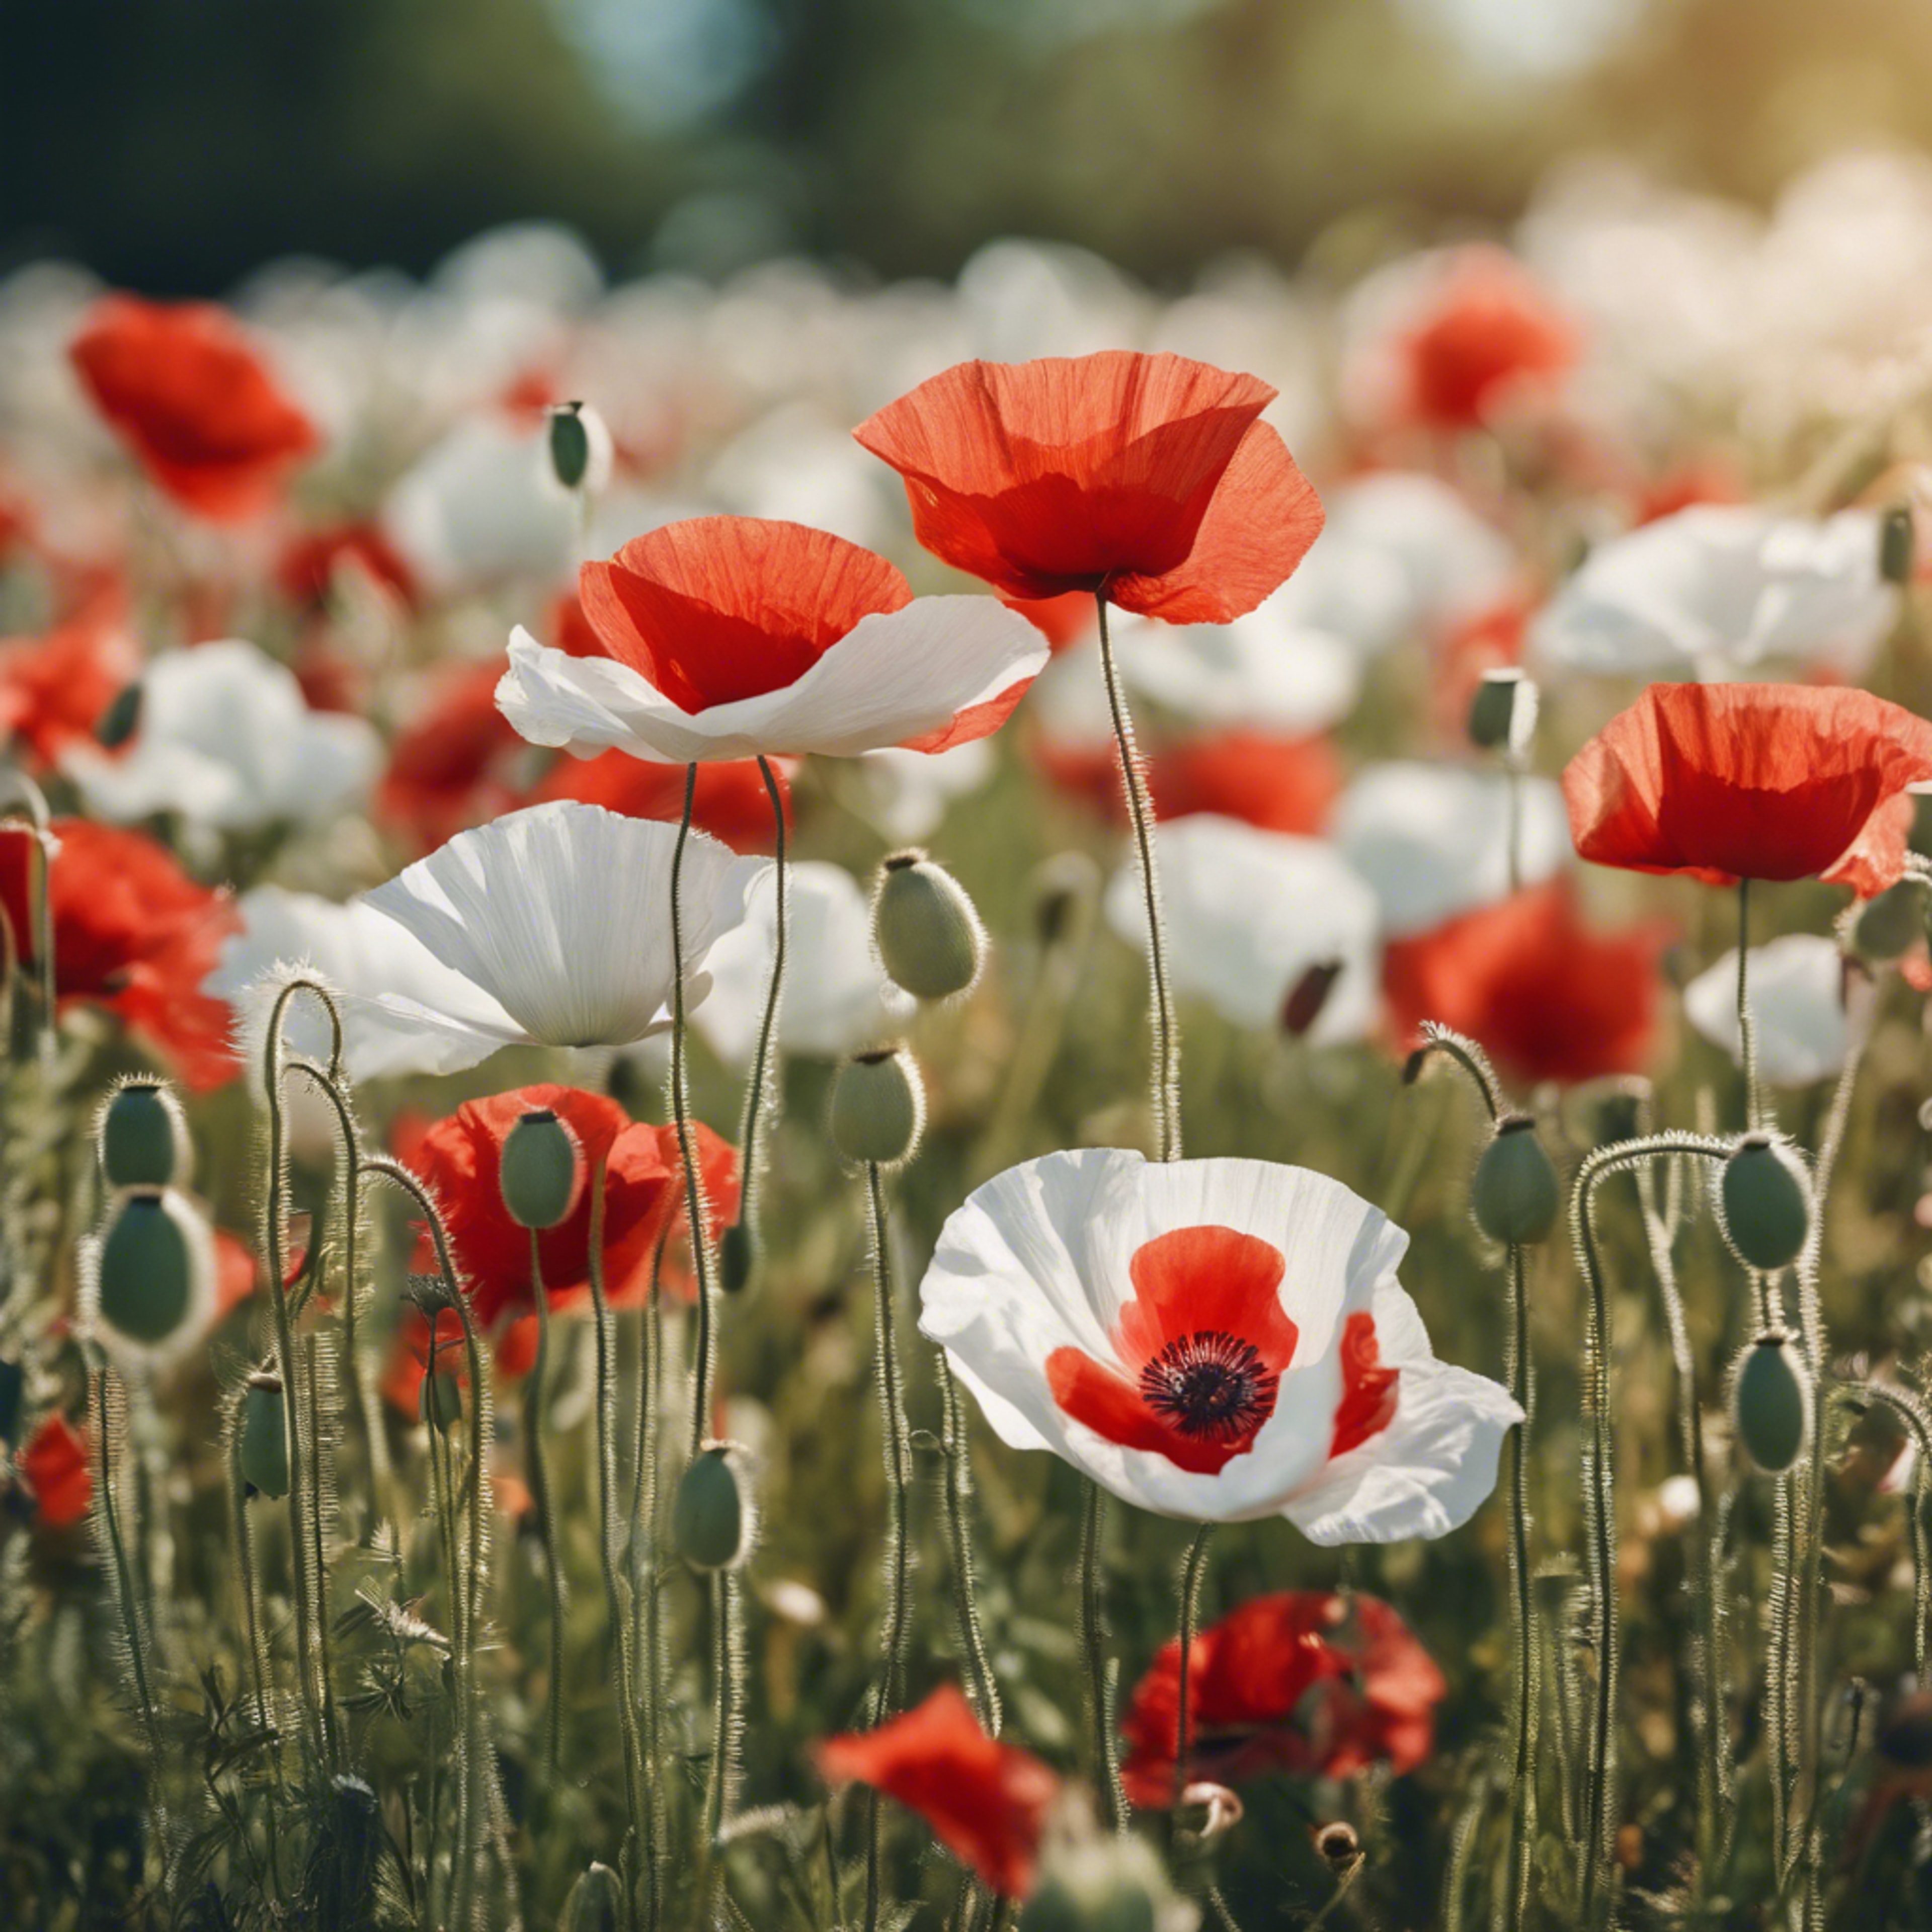 A patch of vibrant red and white poppy flowers in a summer meadow. Tapeet[6e8905720b3f496680eb]